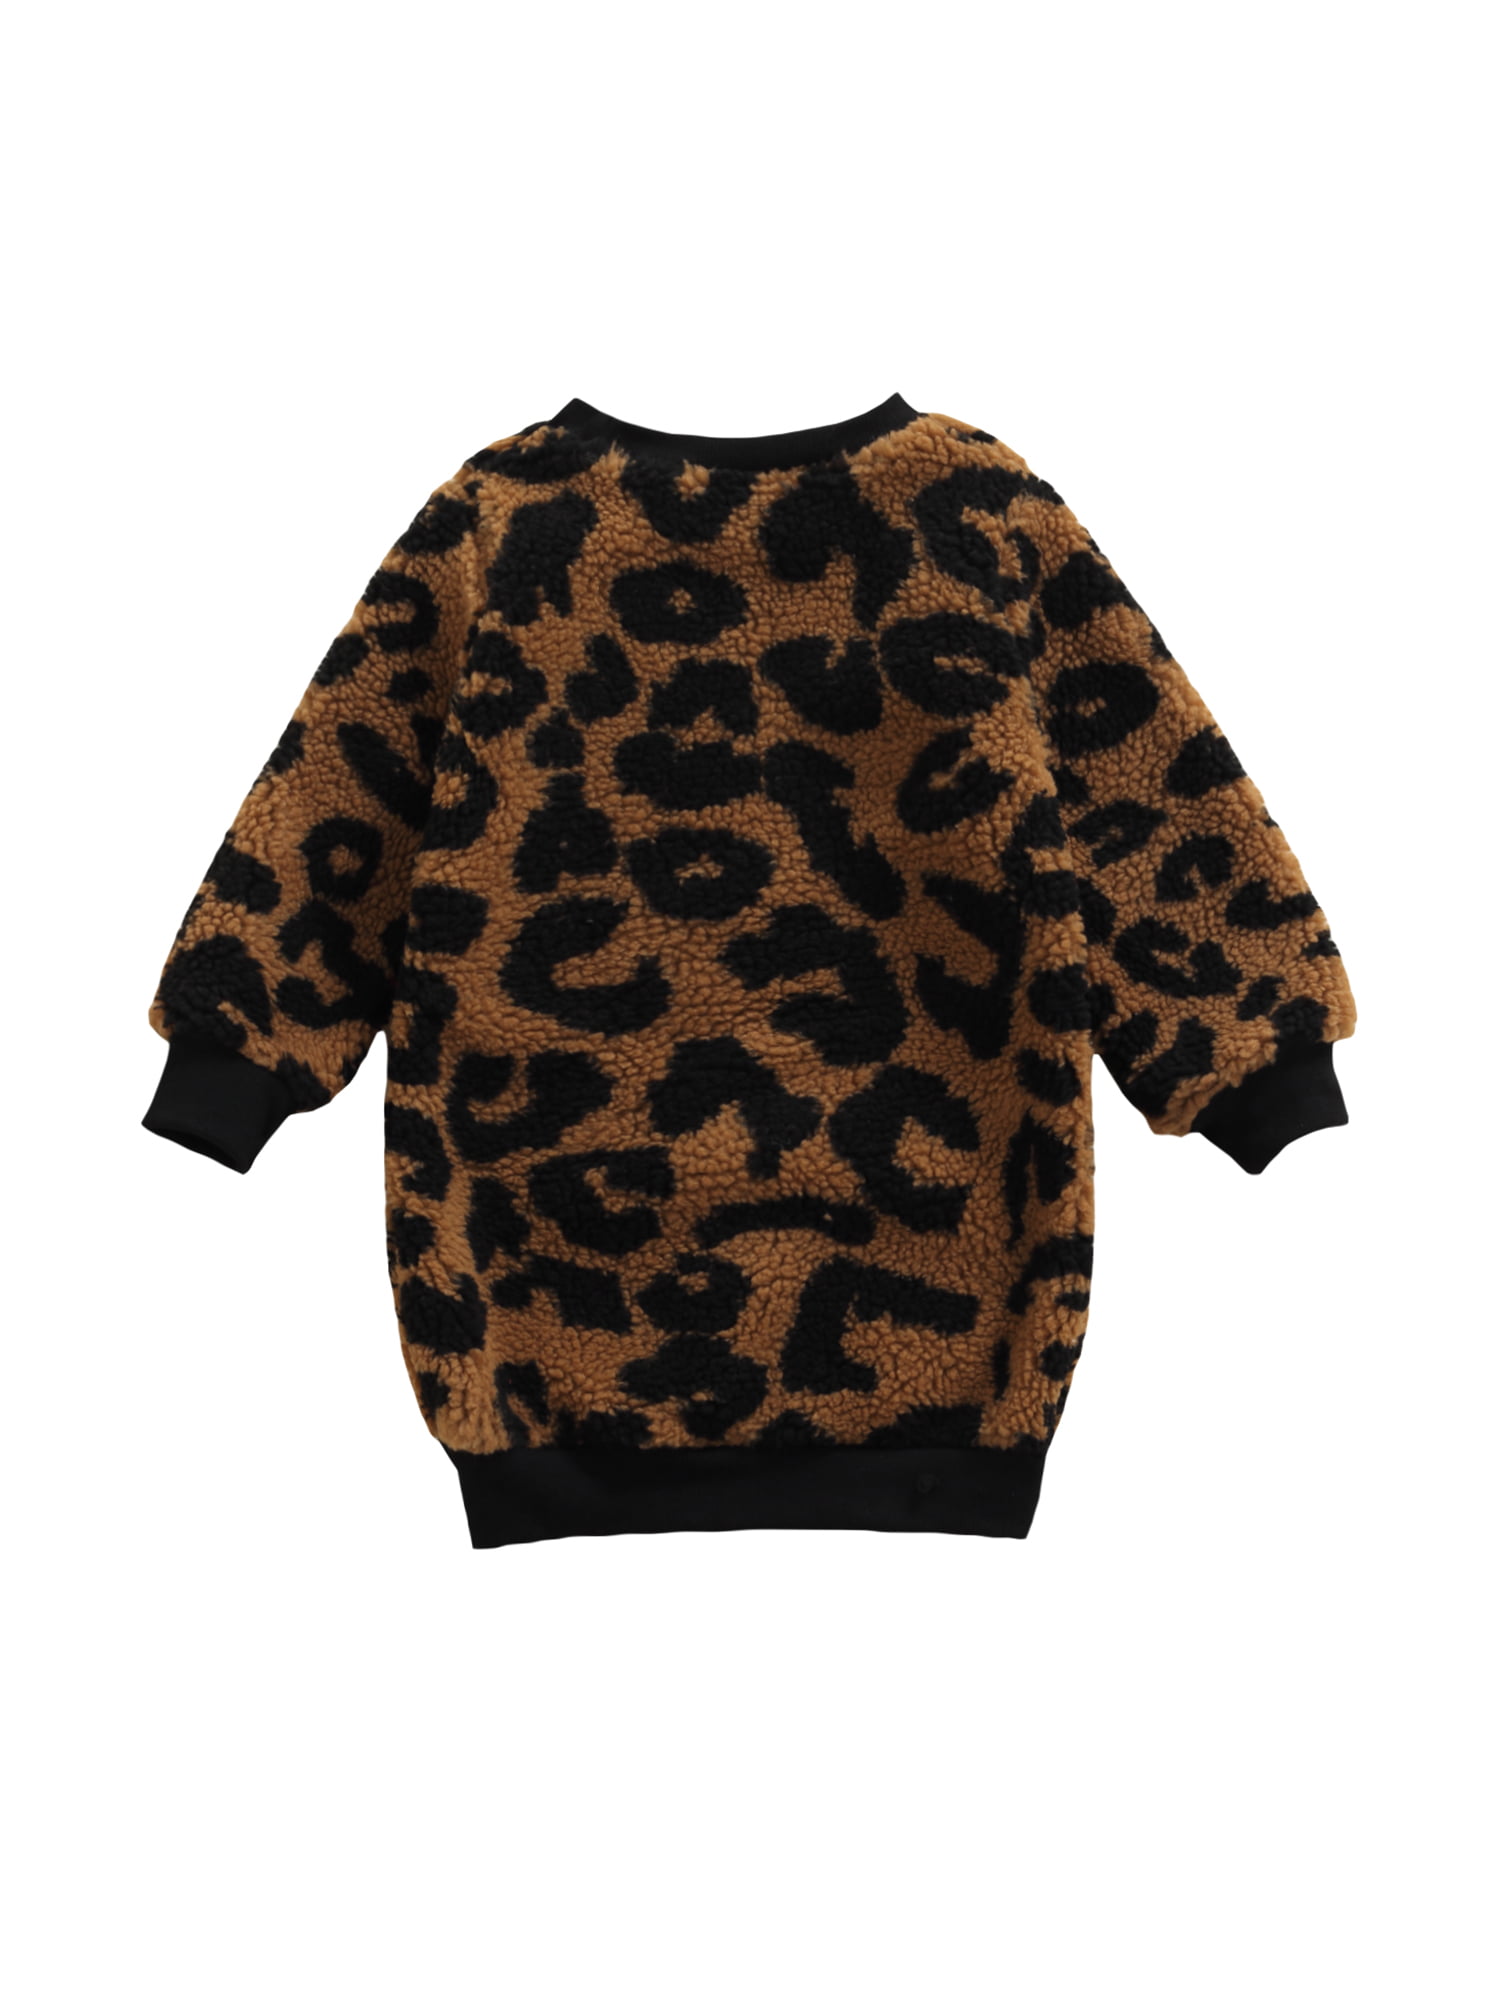 Autumn and Winter Leopard Print Womens Clothing Sweet Tops Pullover Lapel Sweater